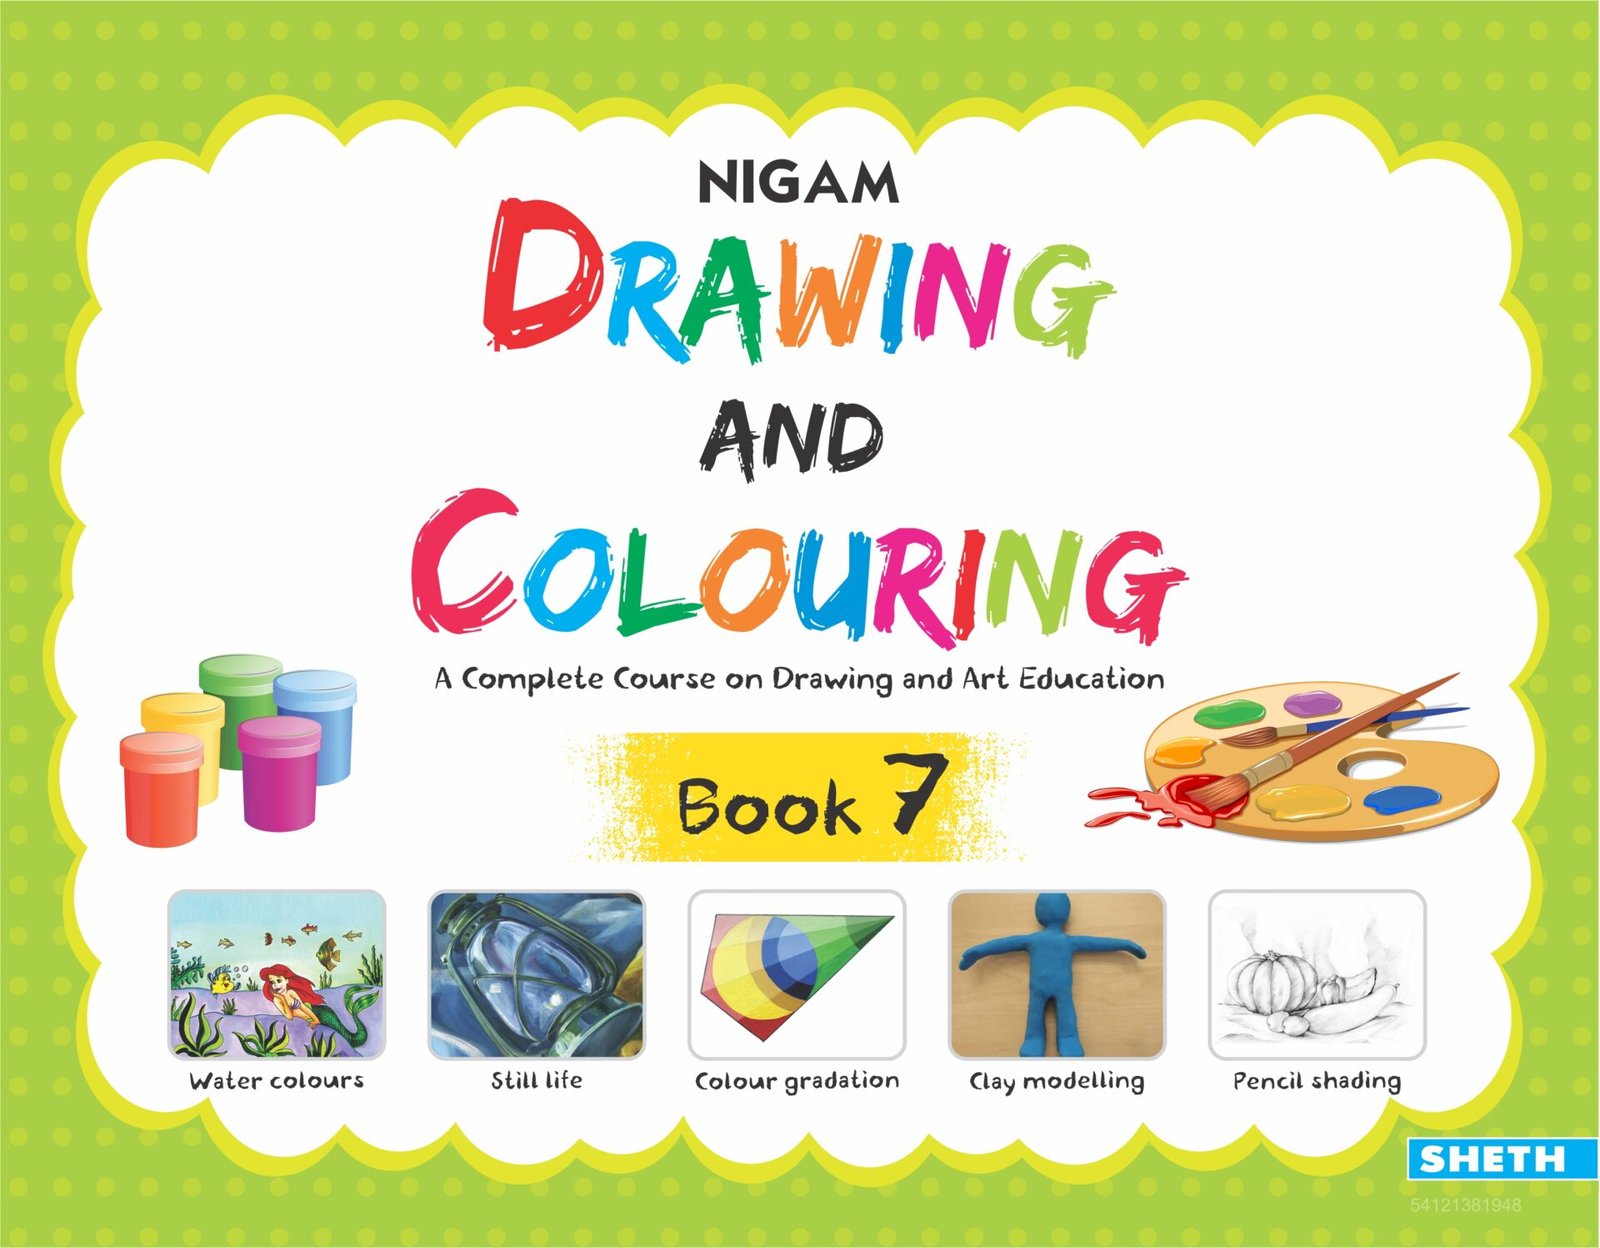 DOMS DRAWING BOOK +12 SHADE COLOUR BOOK WATER CAKES +12 BI COLOUR PENCILS+